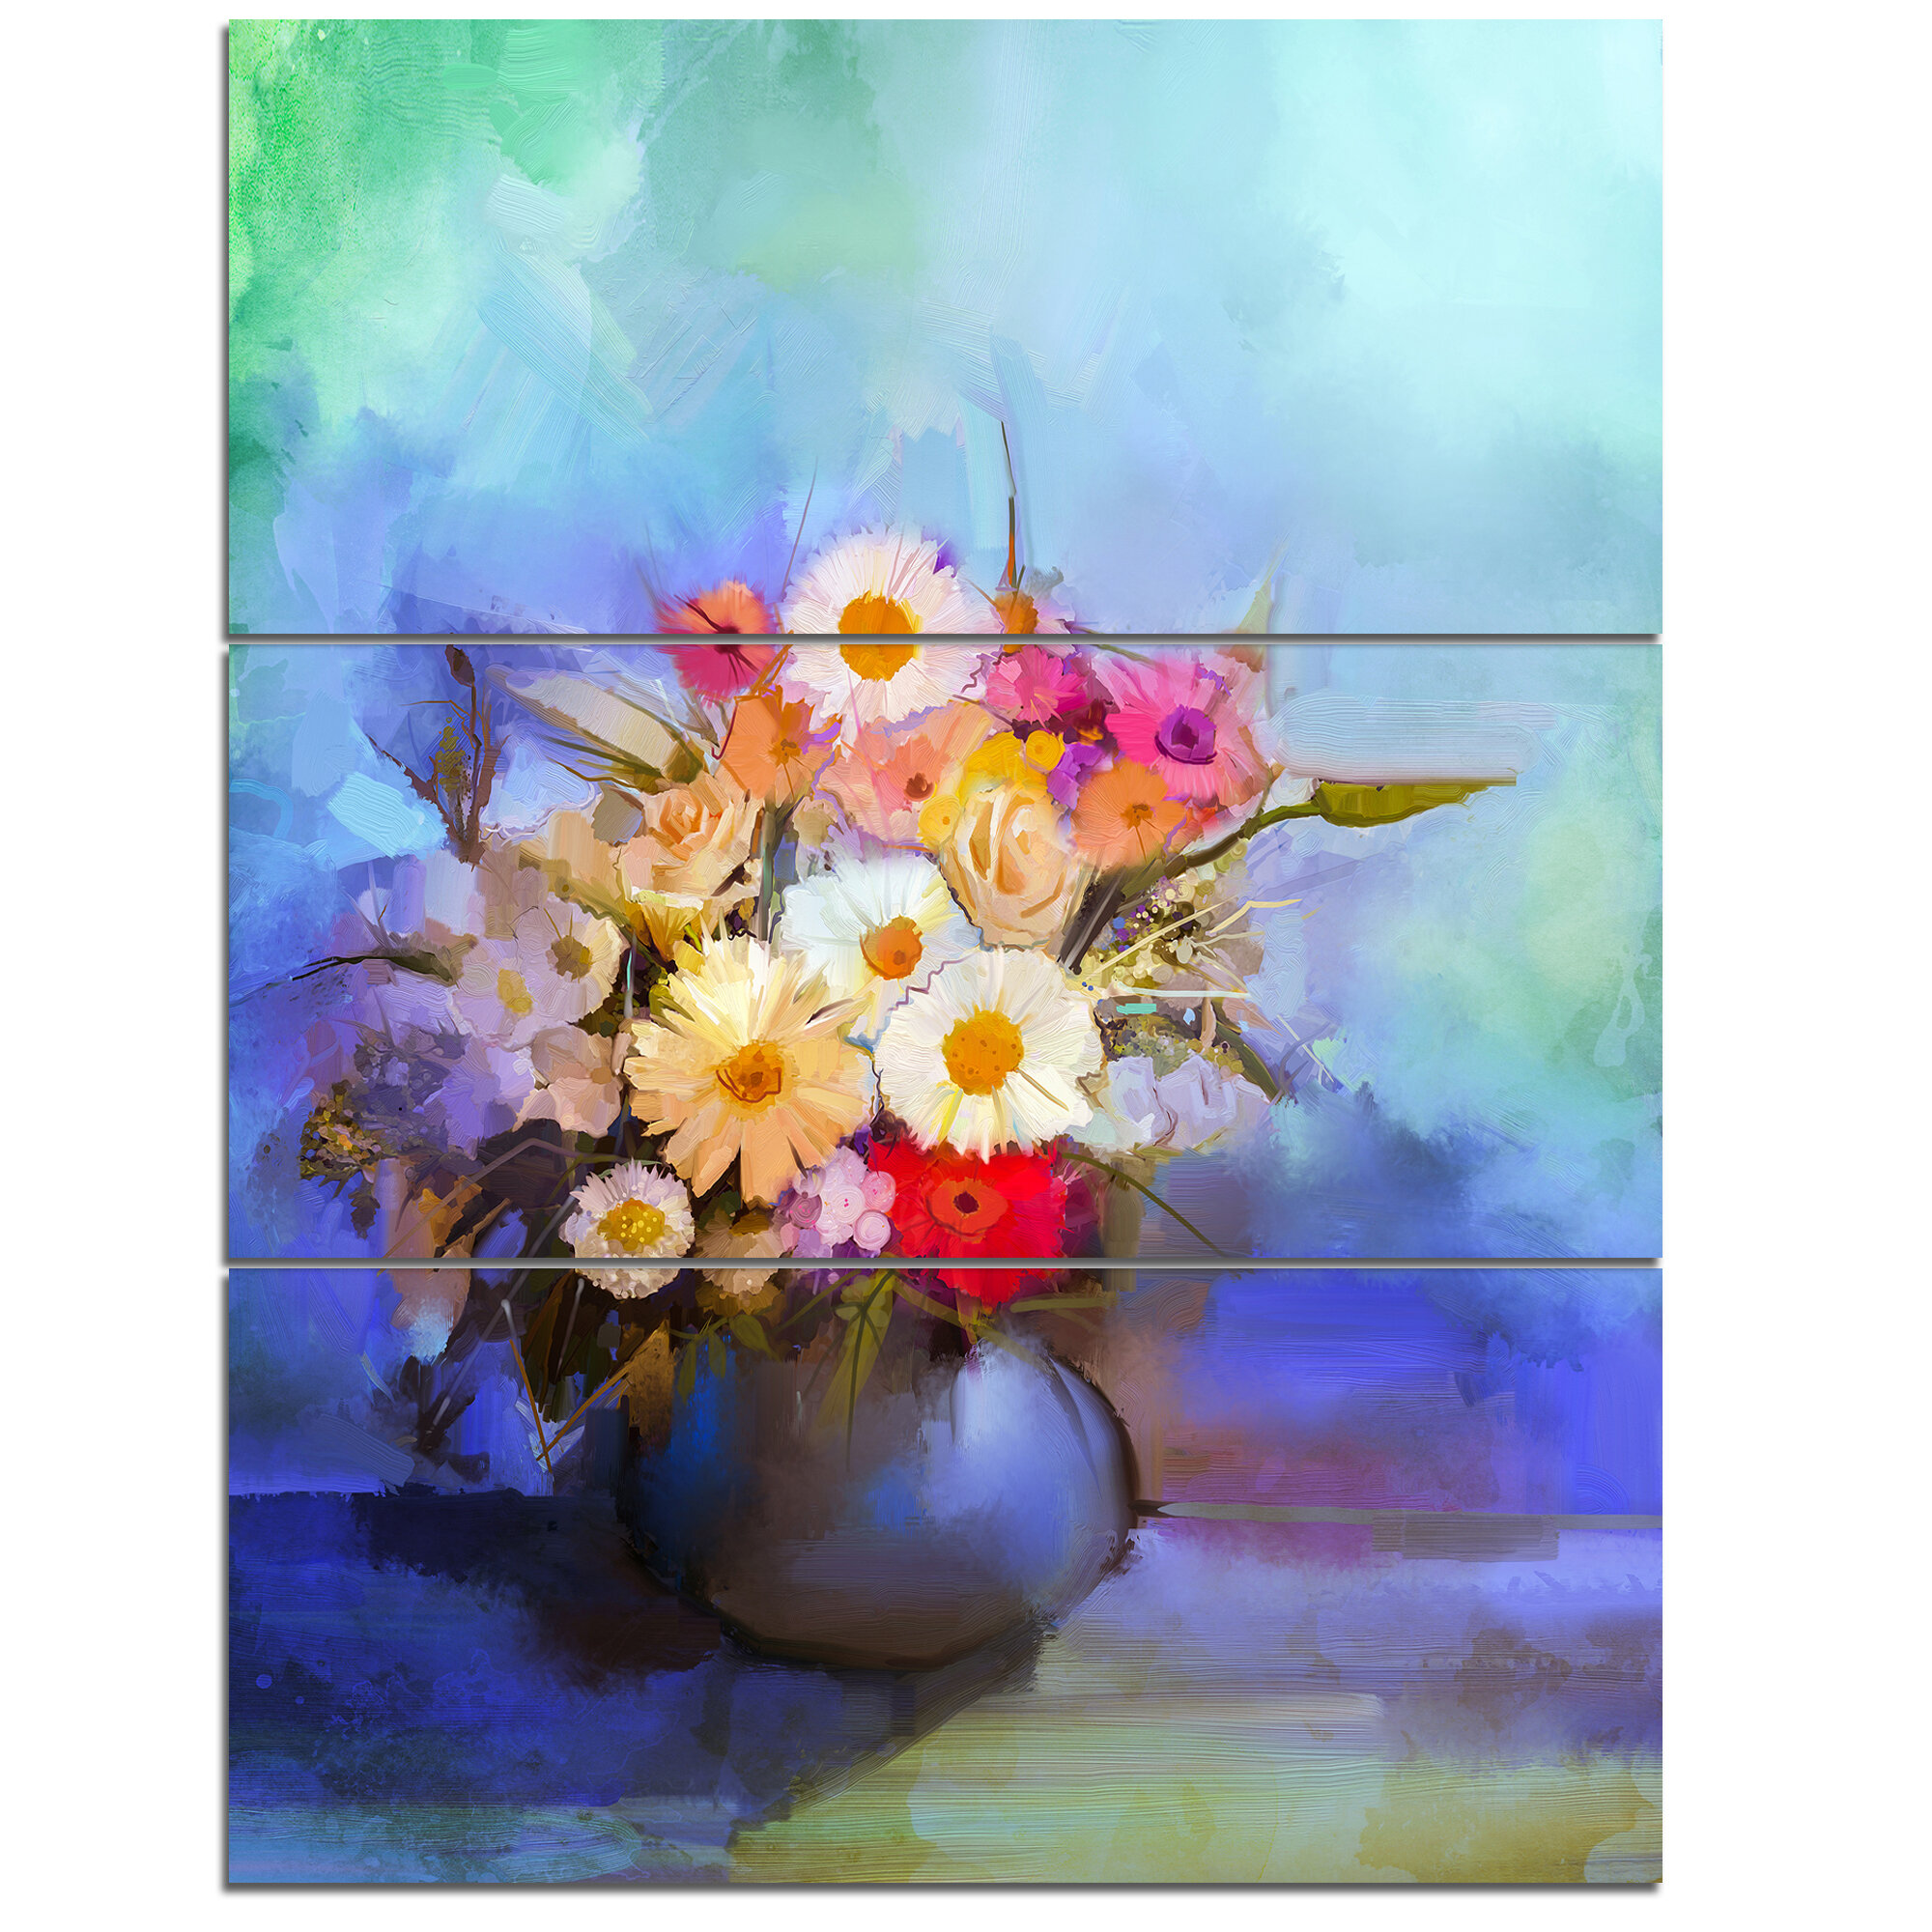 Watercolor Print Art Sale Floral Still Life Quilt Painting Print Watercolor Flowers Flower Bouquet Painting Giclee Red Blue Painting Art & Collectibles Digital Prints Sibawor.id